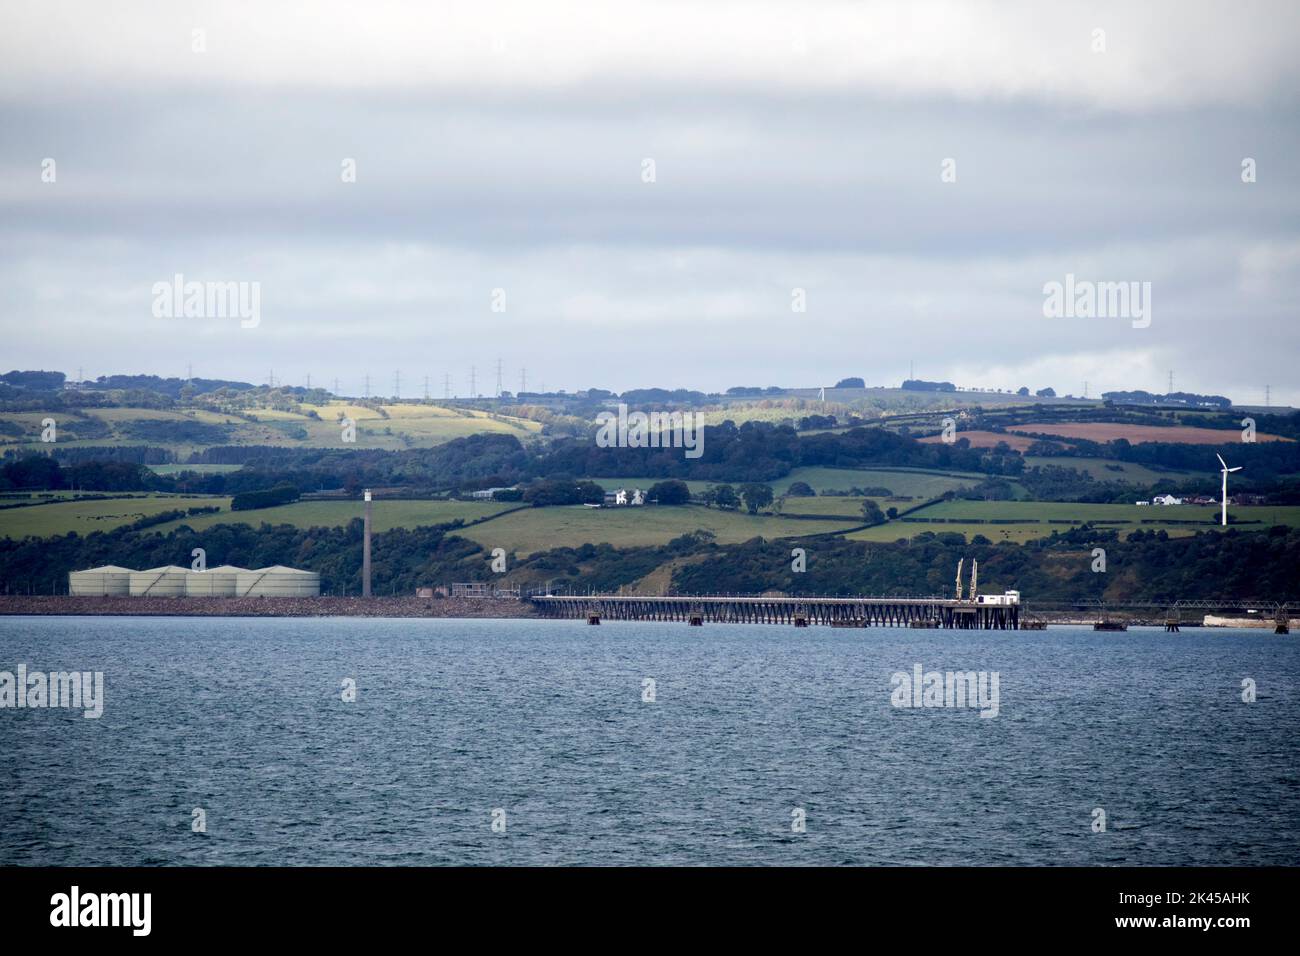 cloughan point jetty and oil storage facility on the shores of belfast lough county antrim northern ireland Stock Photo